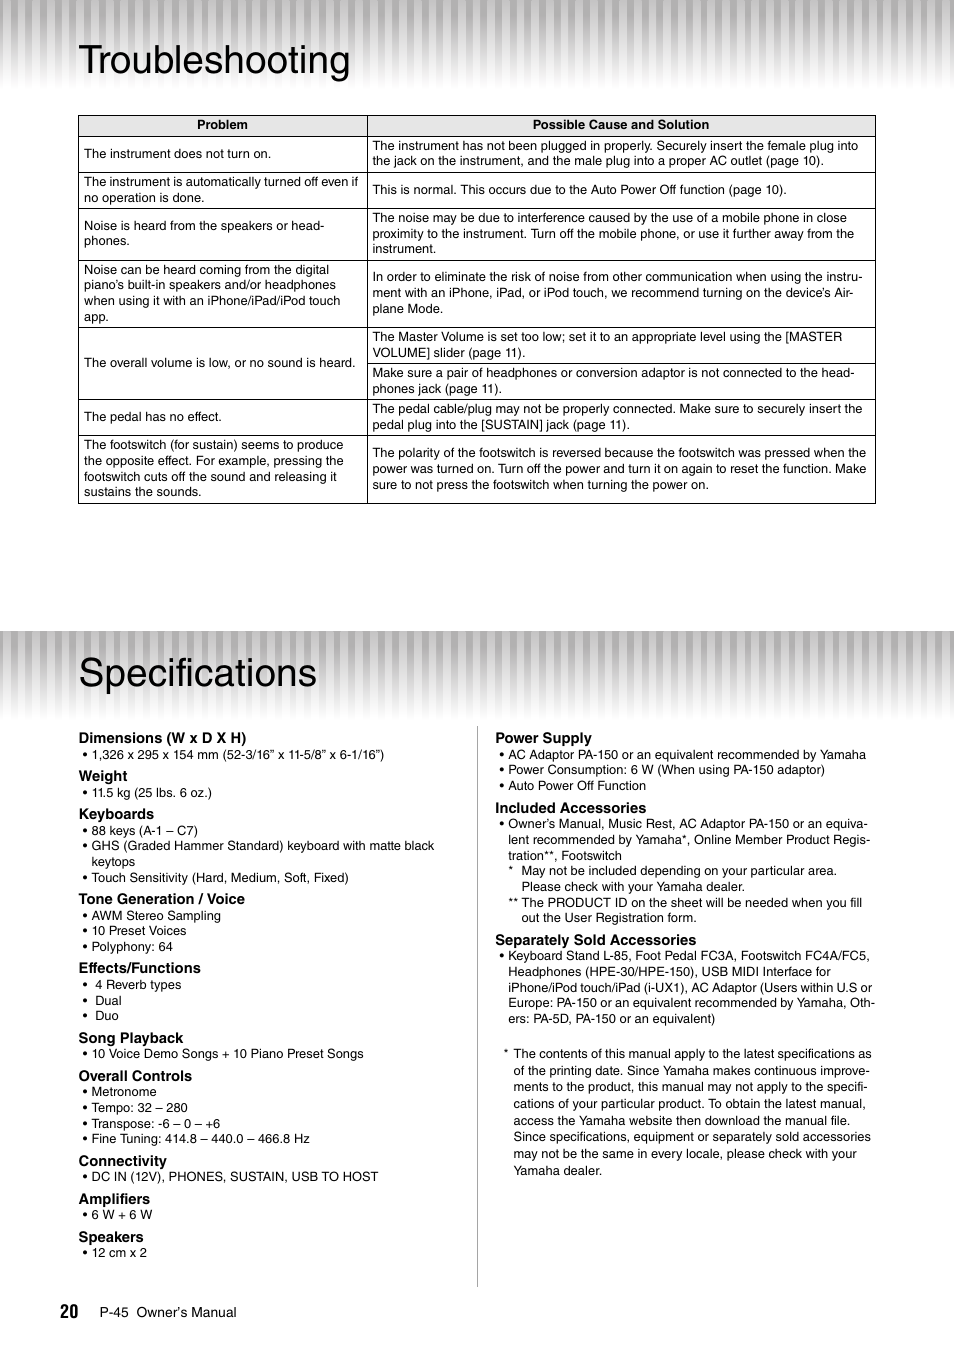 Appendix, Troubleshooting, Specifications | Troubleshooting specifications | Yamaha P-45 User Manual | Page 20 / 24